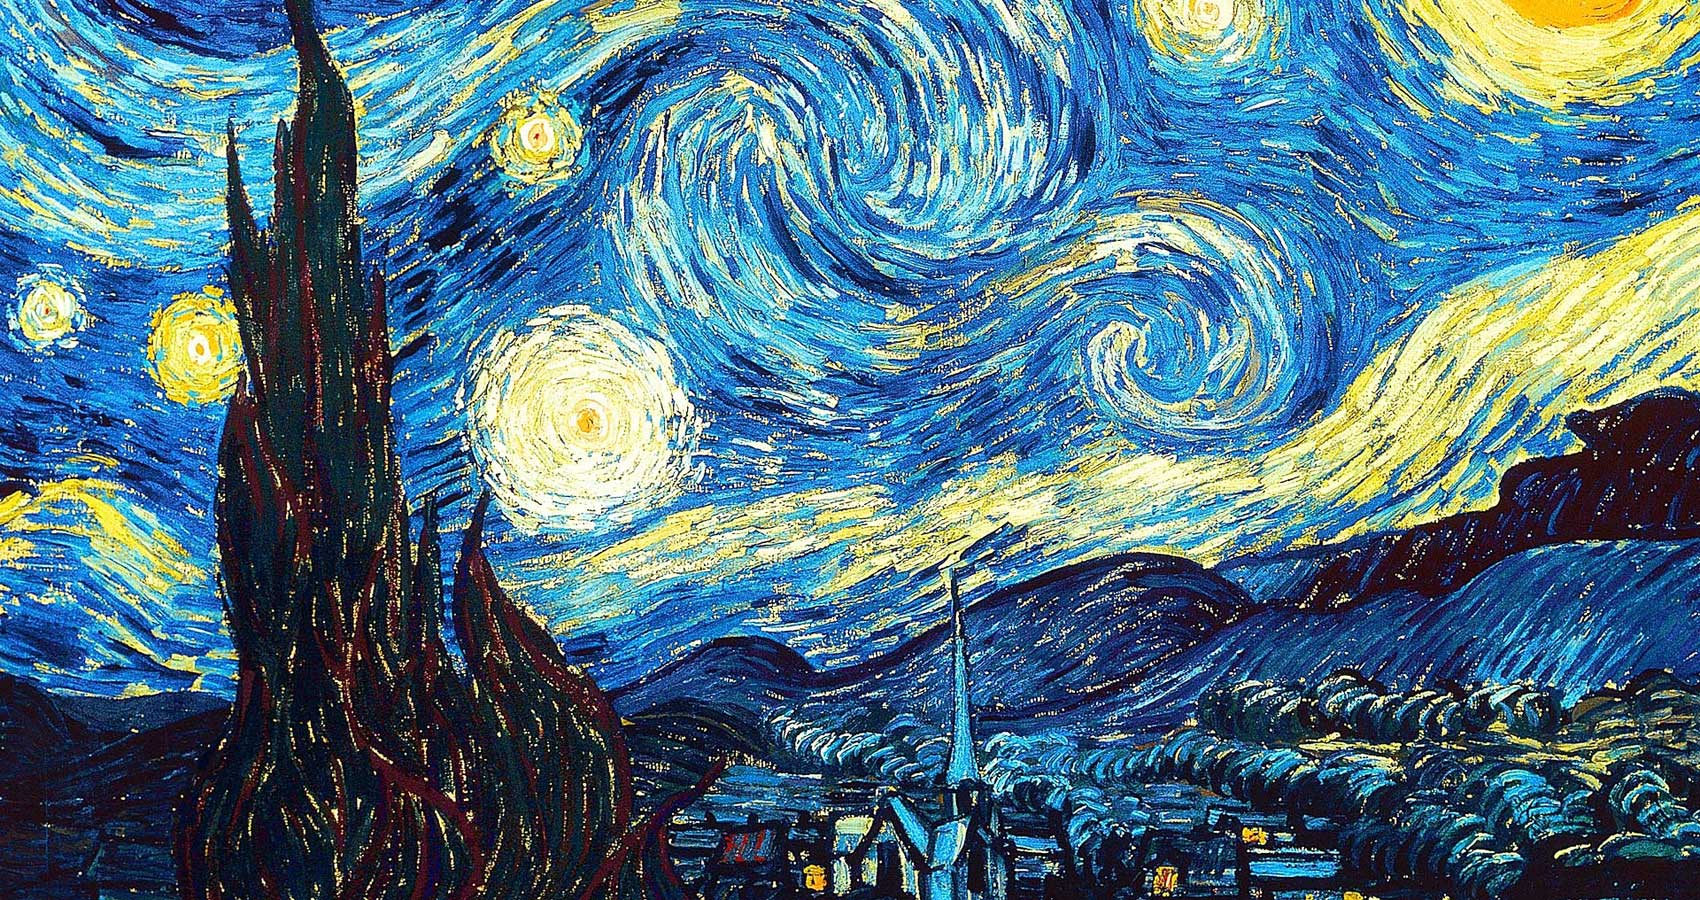 A Date under Van Gogh’s Starry Sky, poetry by Eman Hany at Spillwords.com